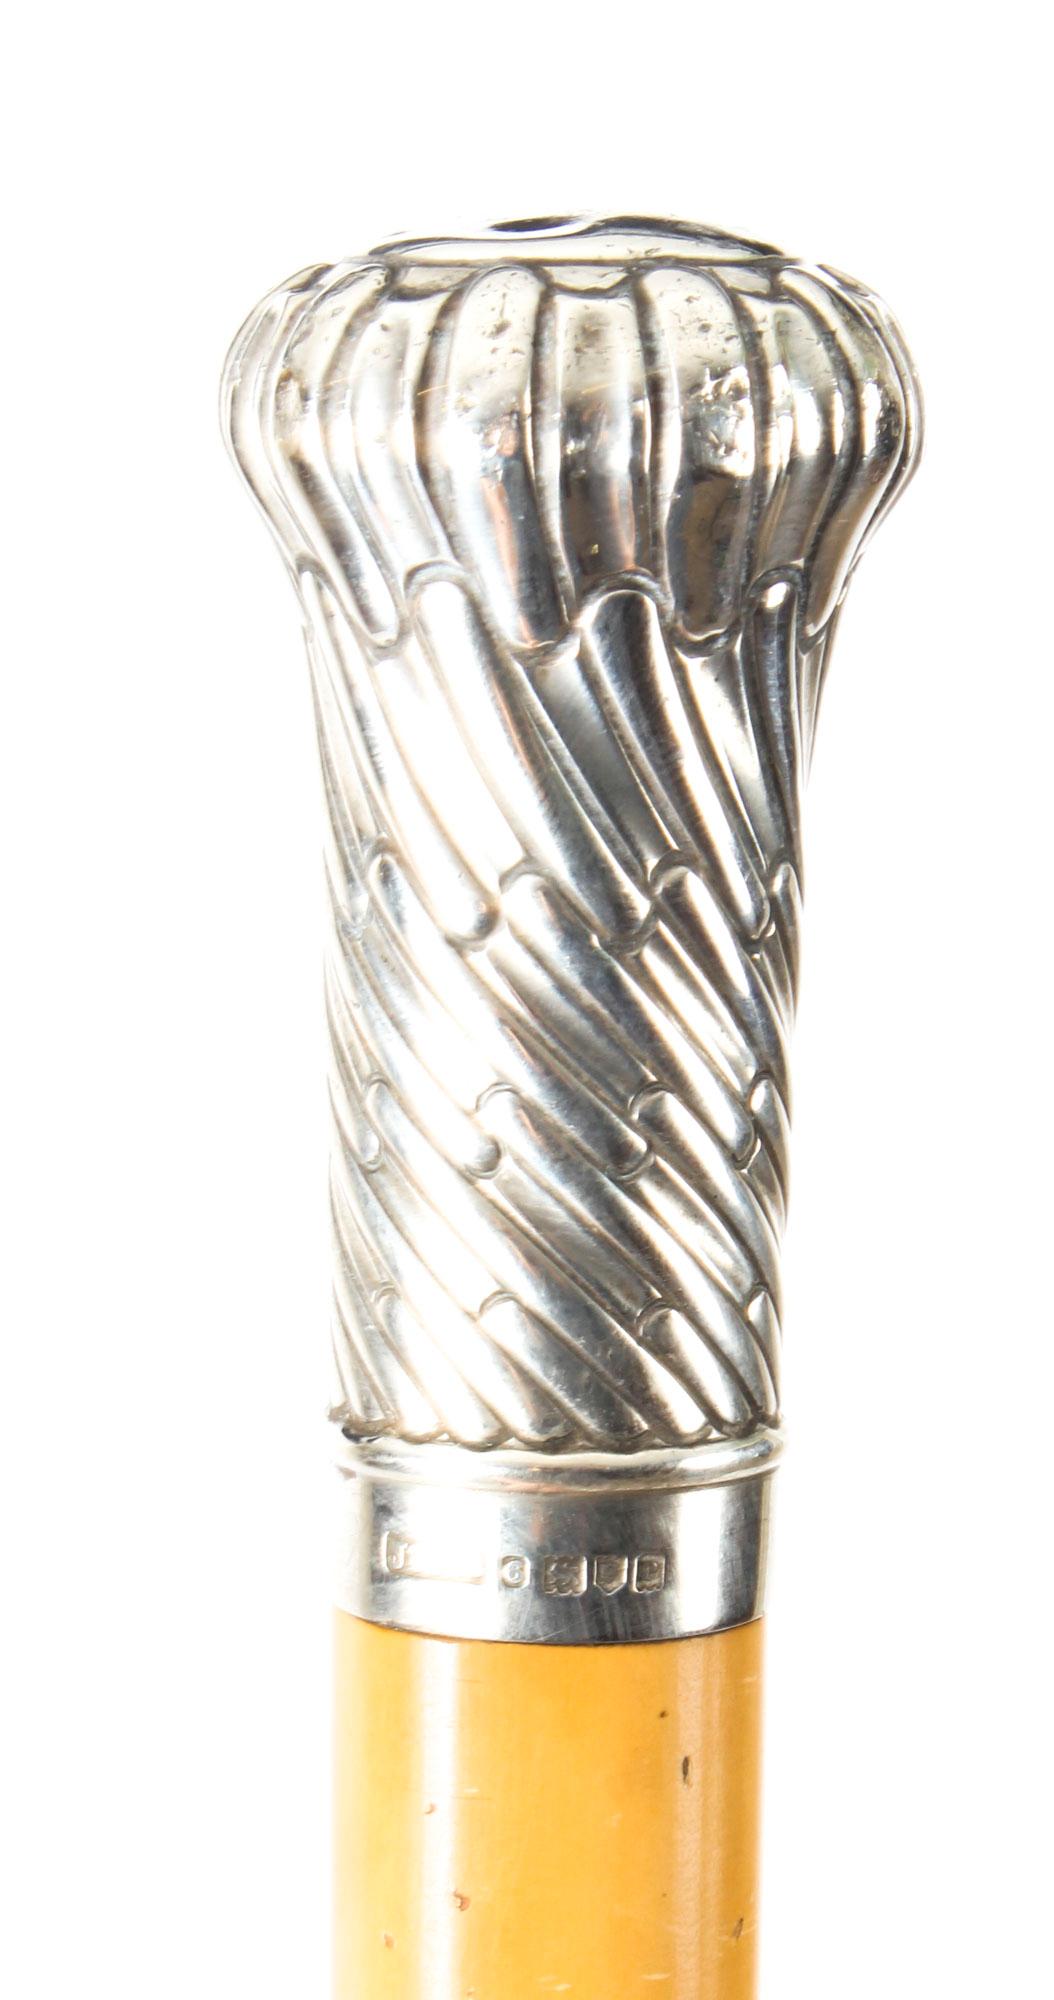 This is a superb sterling silver mounted Malacca gentleman's walking stick with hallmarks for London 1910.

It features a globular sterling silver pommel cast with a twisted scalloped zigzag.

The Malacca shaft is complete with its original horn